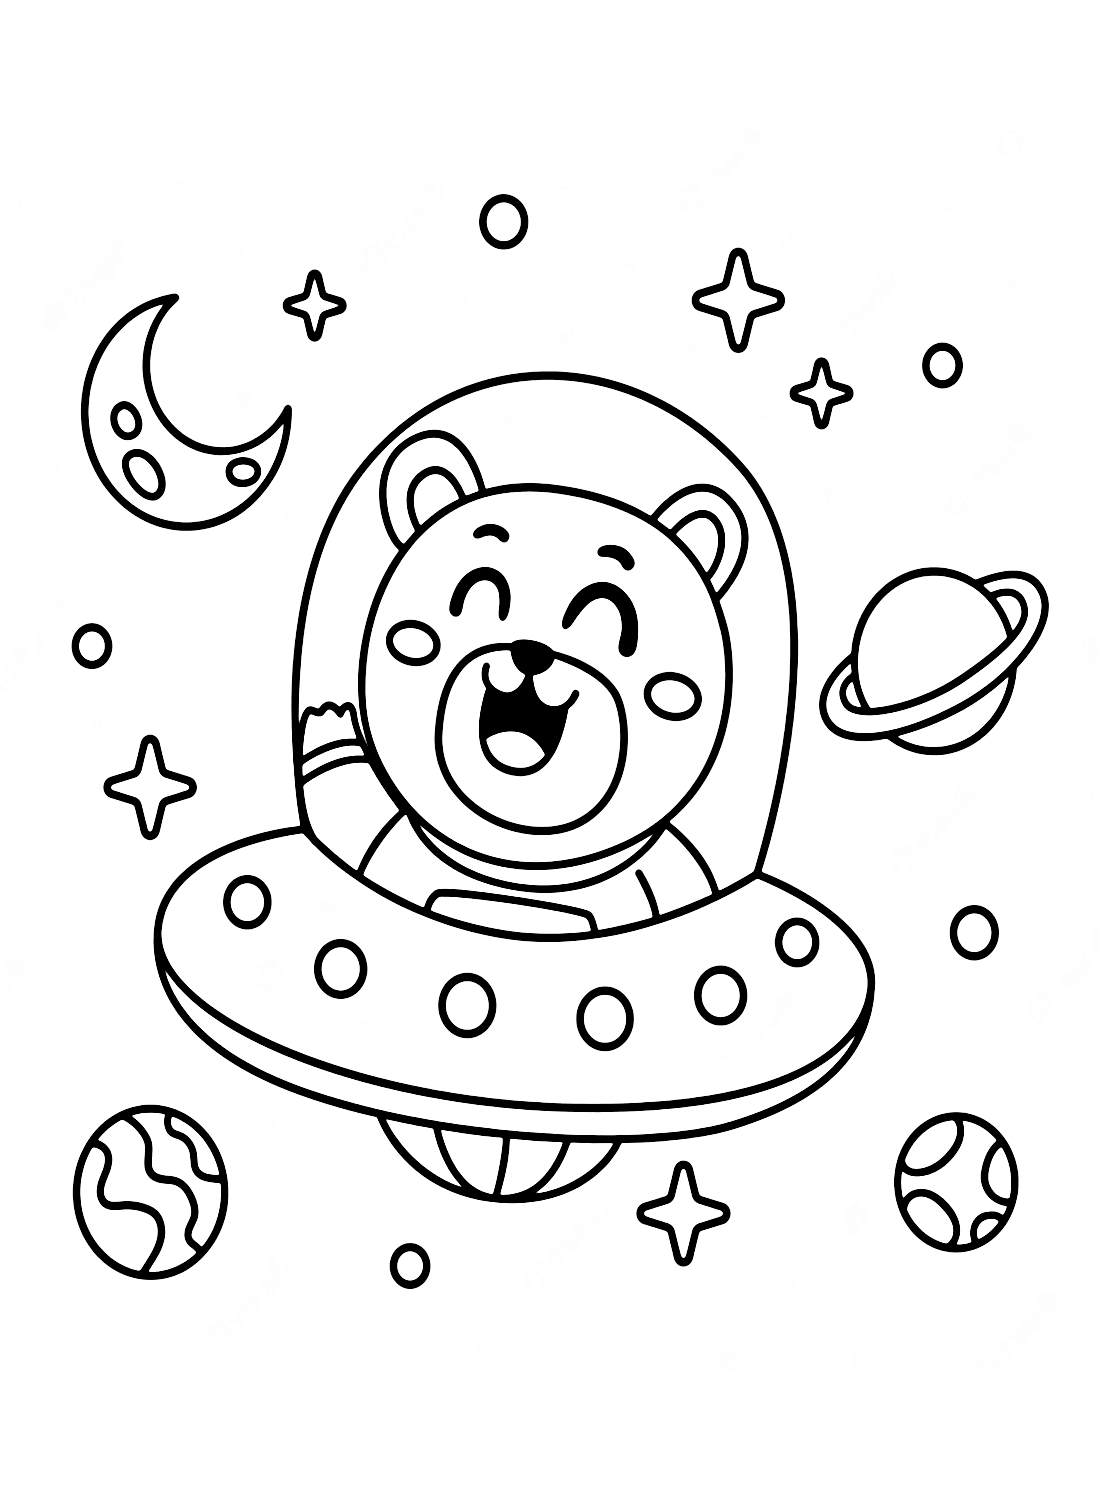 Crayola Free Coloring Pages Free Printable Coloring Pages